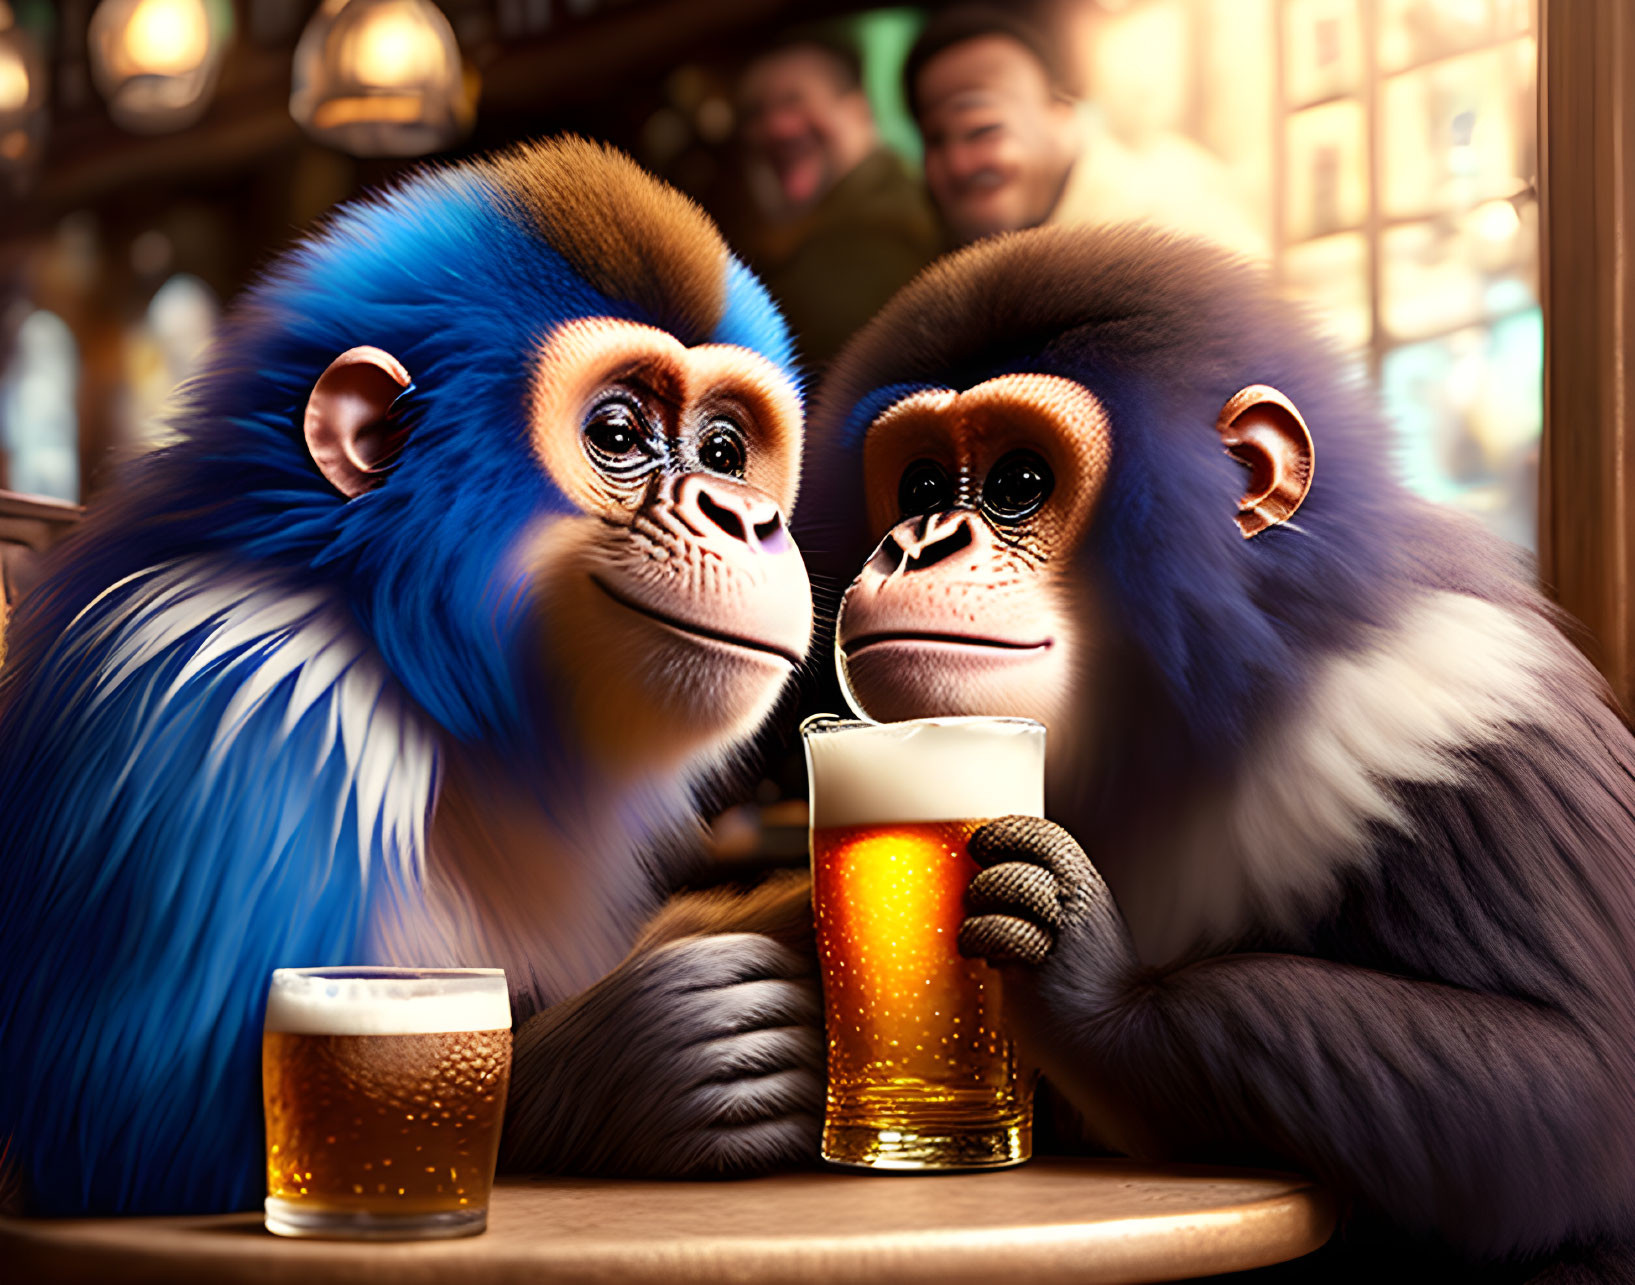 Anthropomorphized monkeys in cozy pub setting with warm lighting.